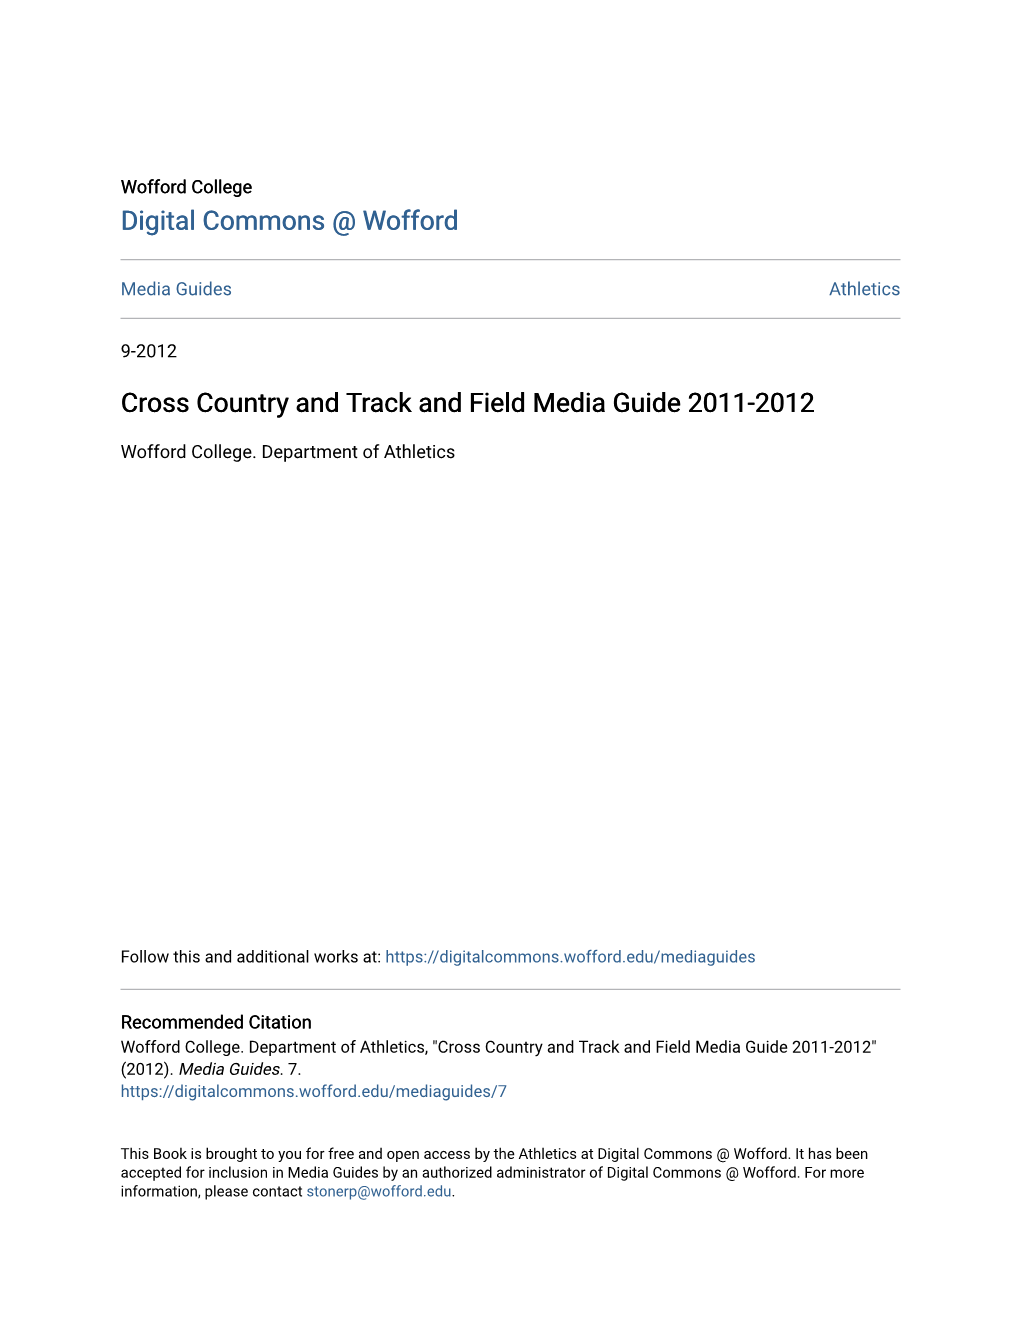 Cross Country and Track and Field Media Guide 2011-2012